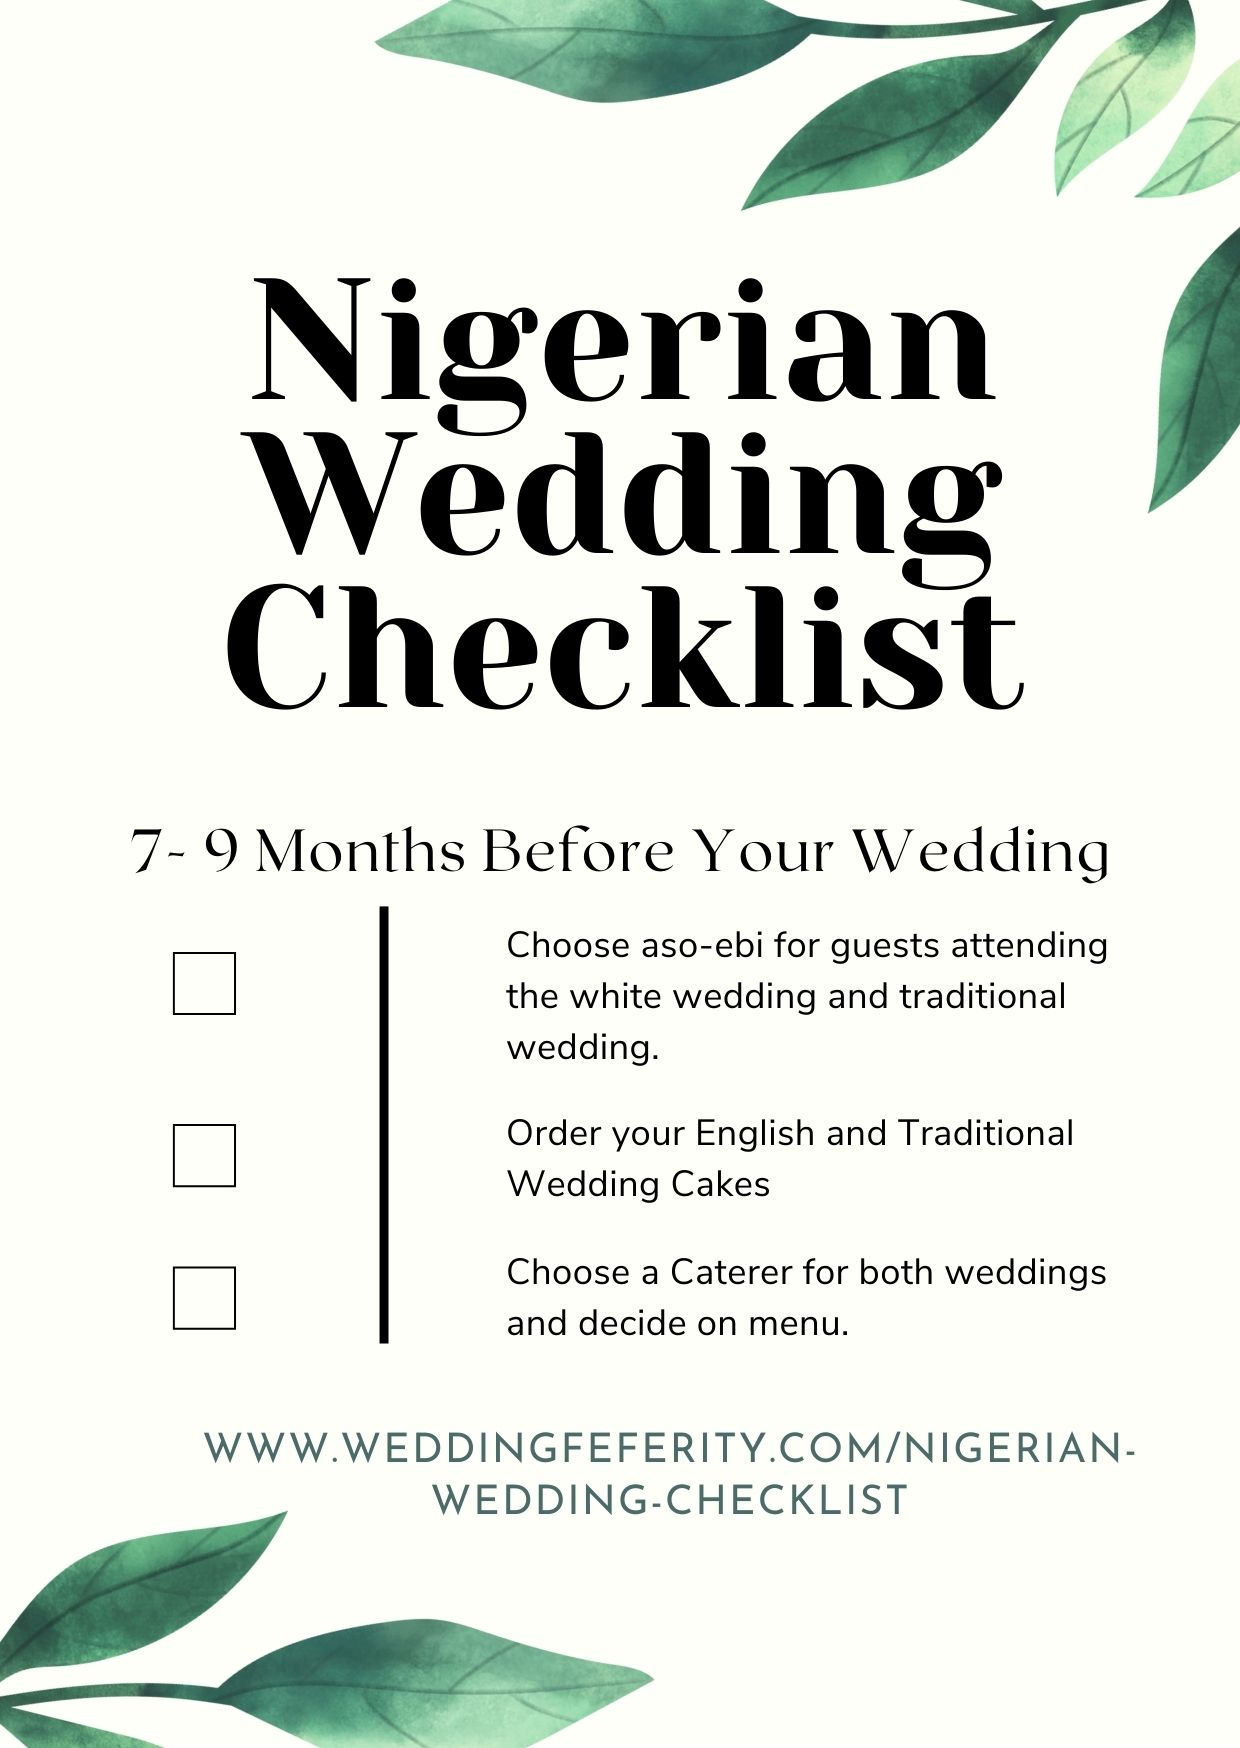 25 Cheap Wedding Souvenir Ideas In Nigeria & How To Customize Them - Design  And Printing Company In Kwara State, Nigeria